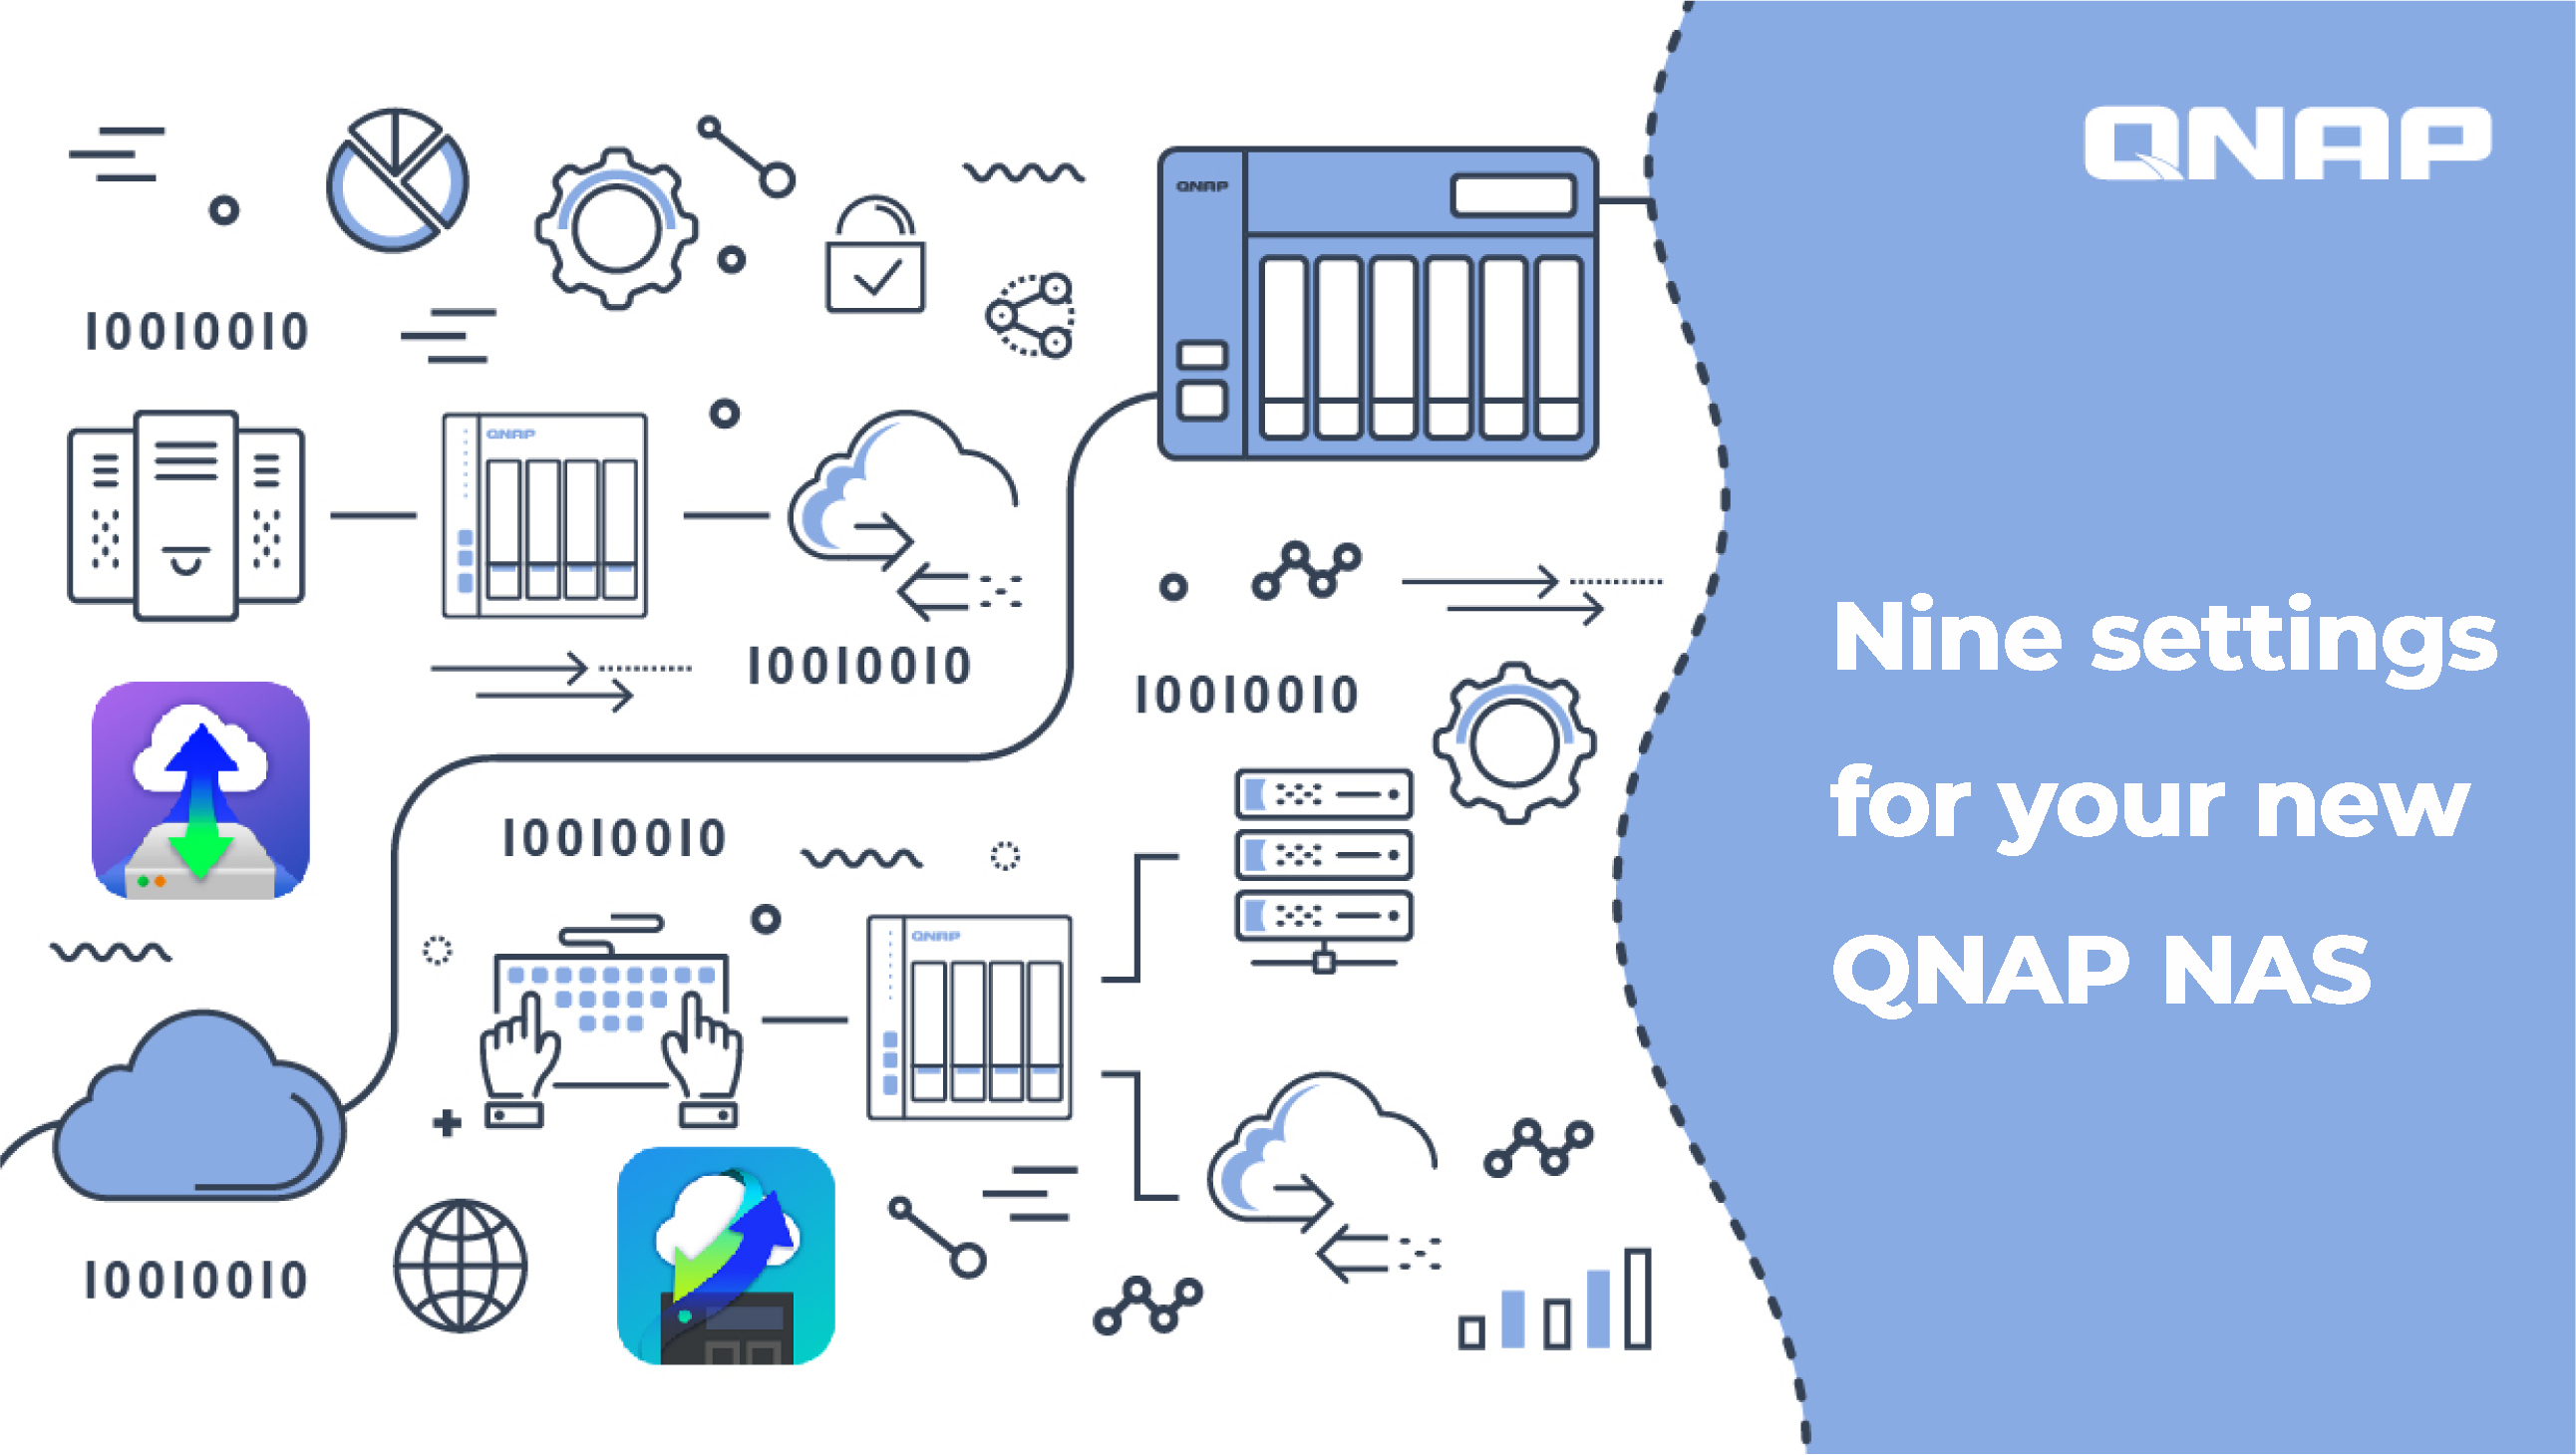 How to Choose the Right QNAP NAS Model?